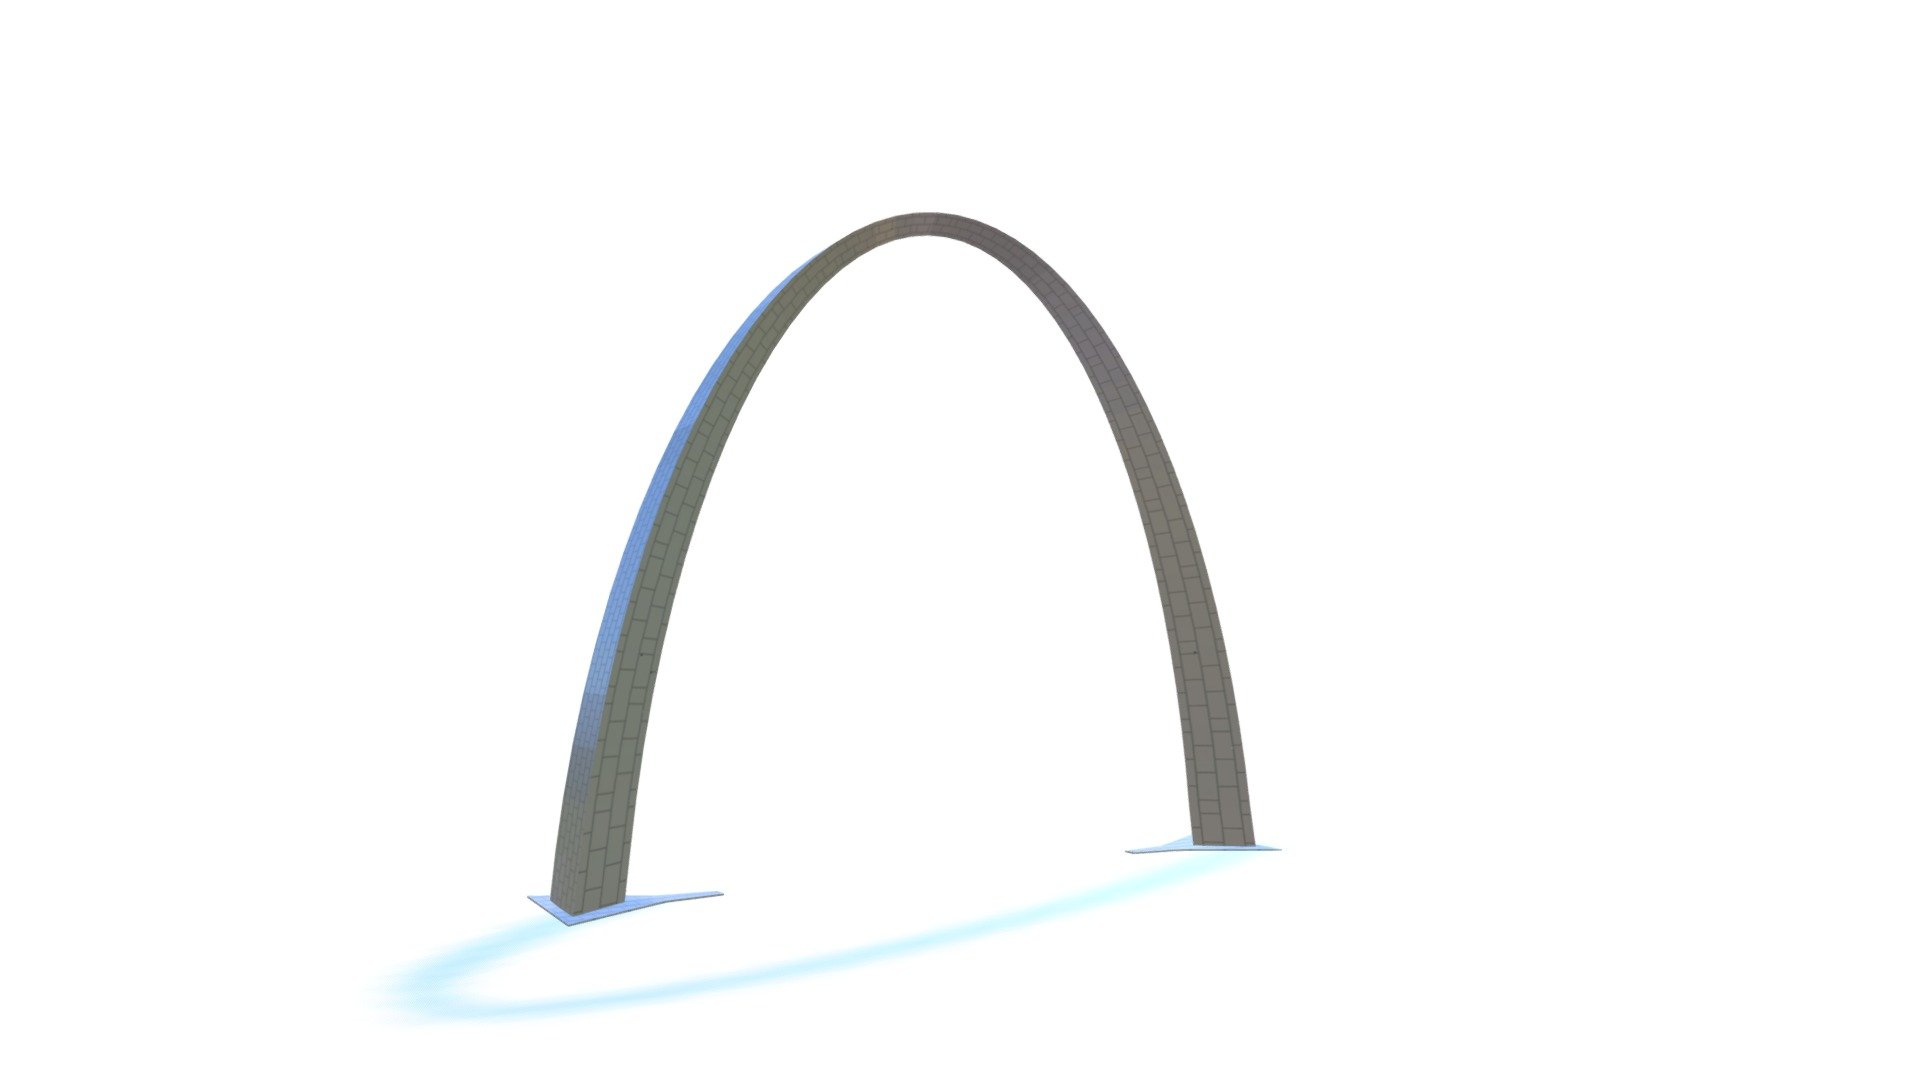 The Gateway Arch is a 630-foot monument in St. Louis, Missouri, United States. Clad in stainless steel and built in the form of a weighted catenary arch, it is the world's tallest arch, the tallest man-made monument in the Western Hemisphere, and Missouri's tallest accessible building.

Model is made with Blender

Low poly, high-detailed, textures included 3d model